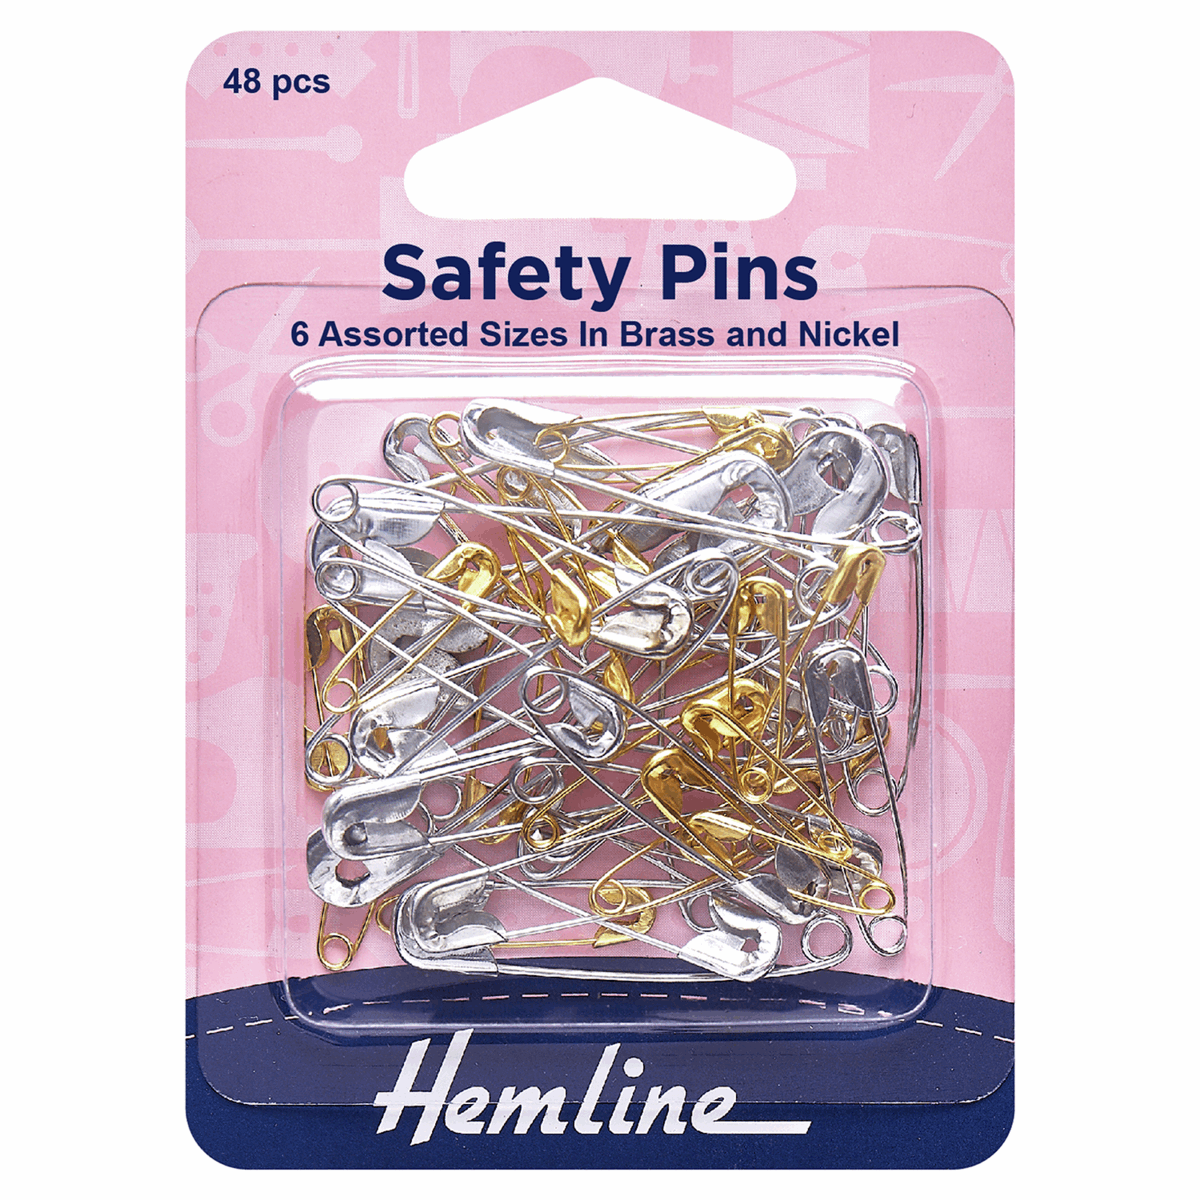 SAFETY PINS ASSORTED - VALUE PACK 48 Pcs